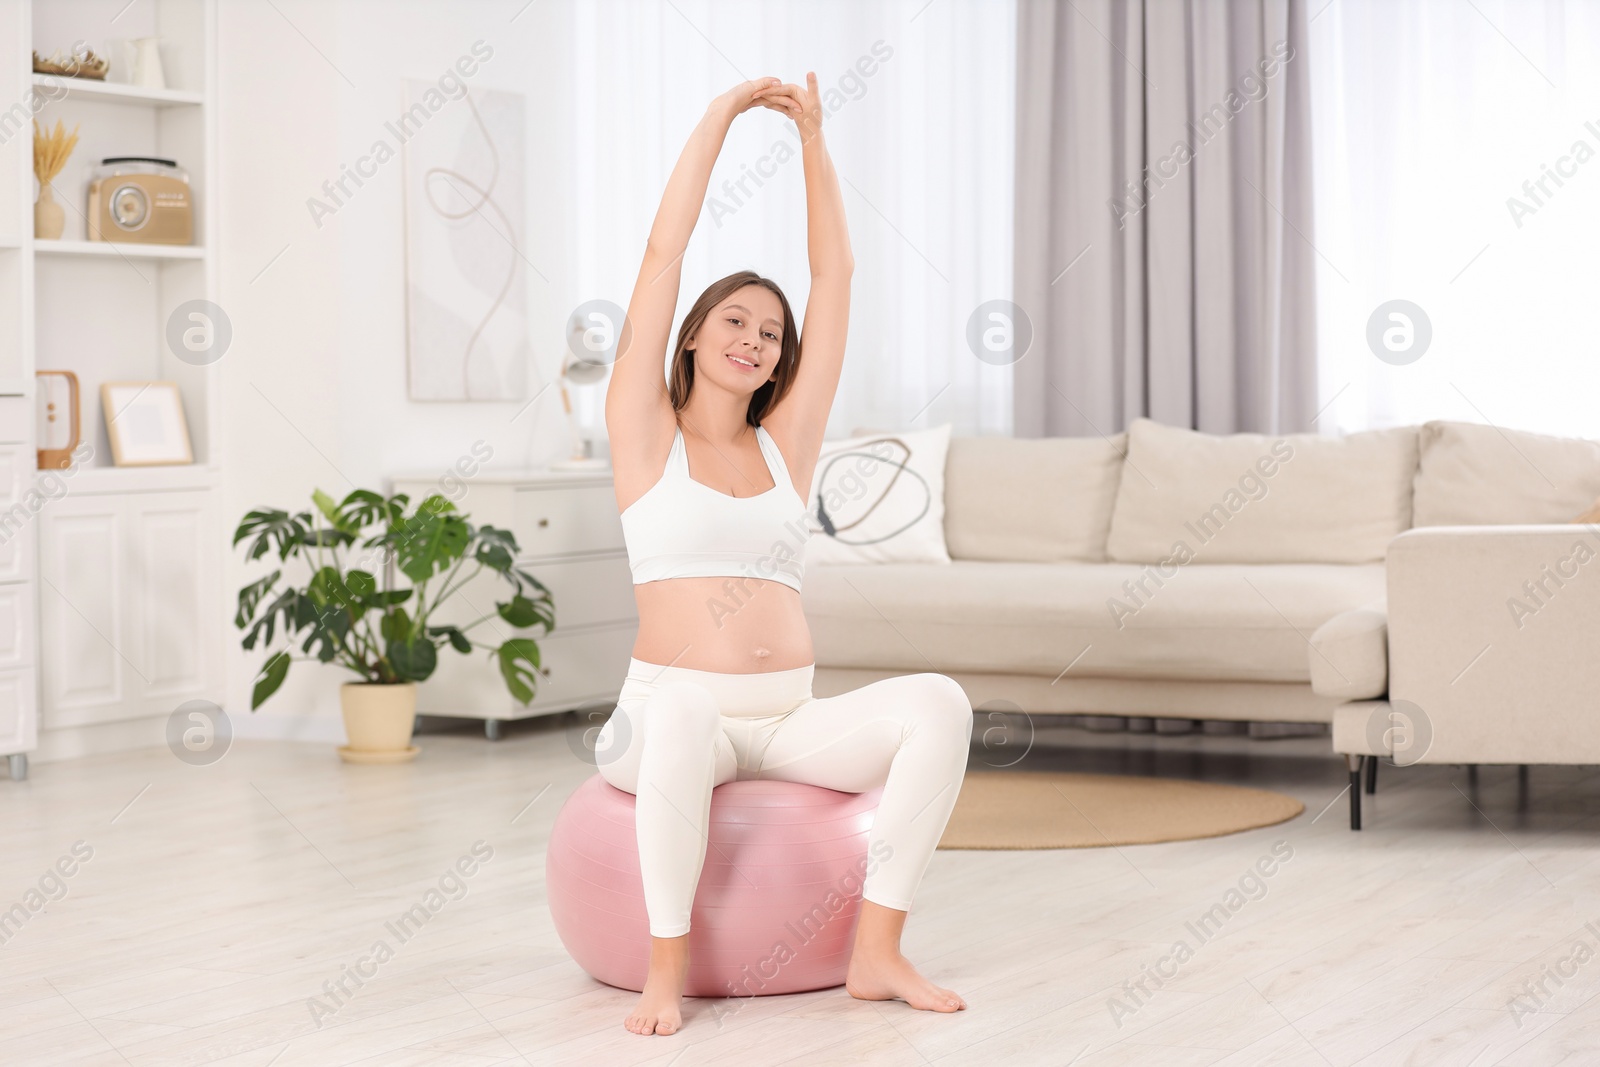 Photo of Pregnant woman doing exercises on fitness ball in room. Home yoga